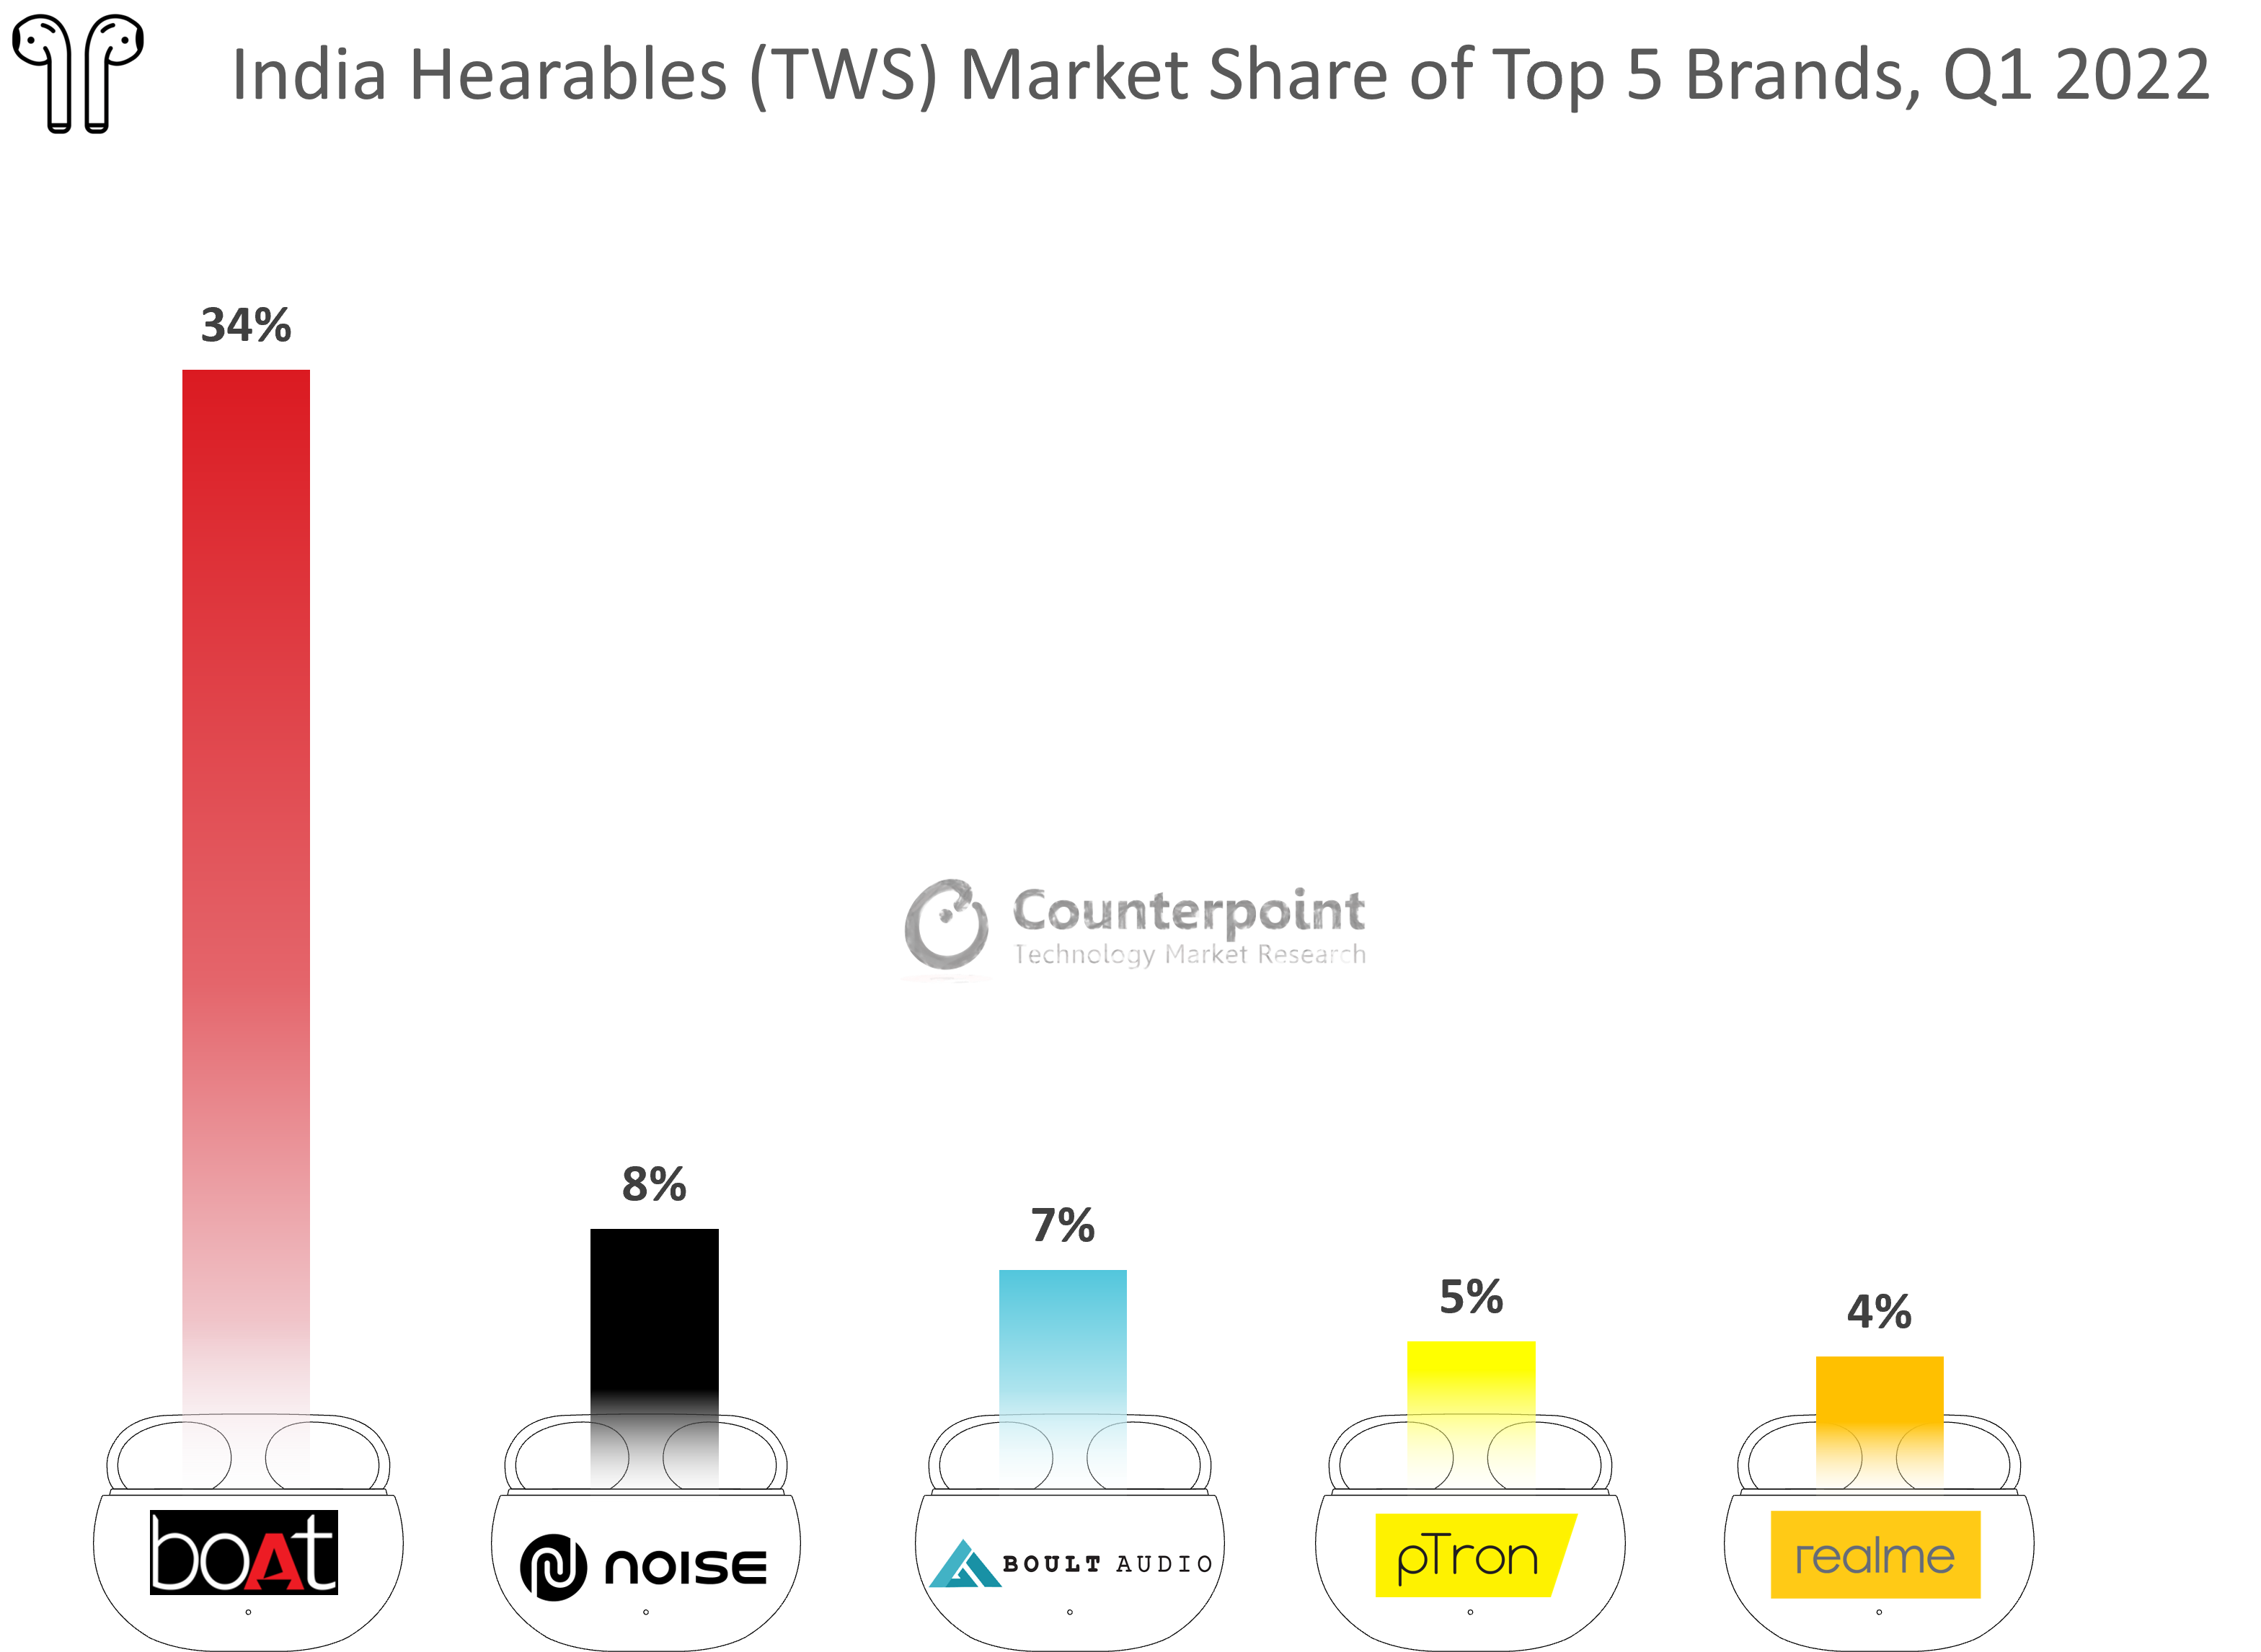 India Hearables TWS Market Share of Top 5 Brands Q1 2022